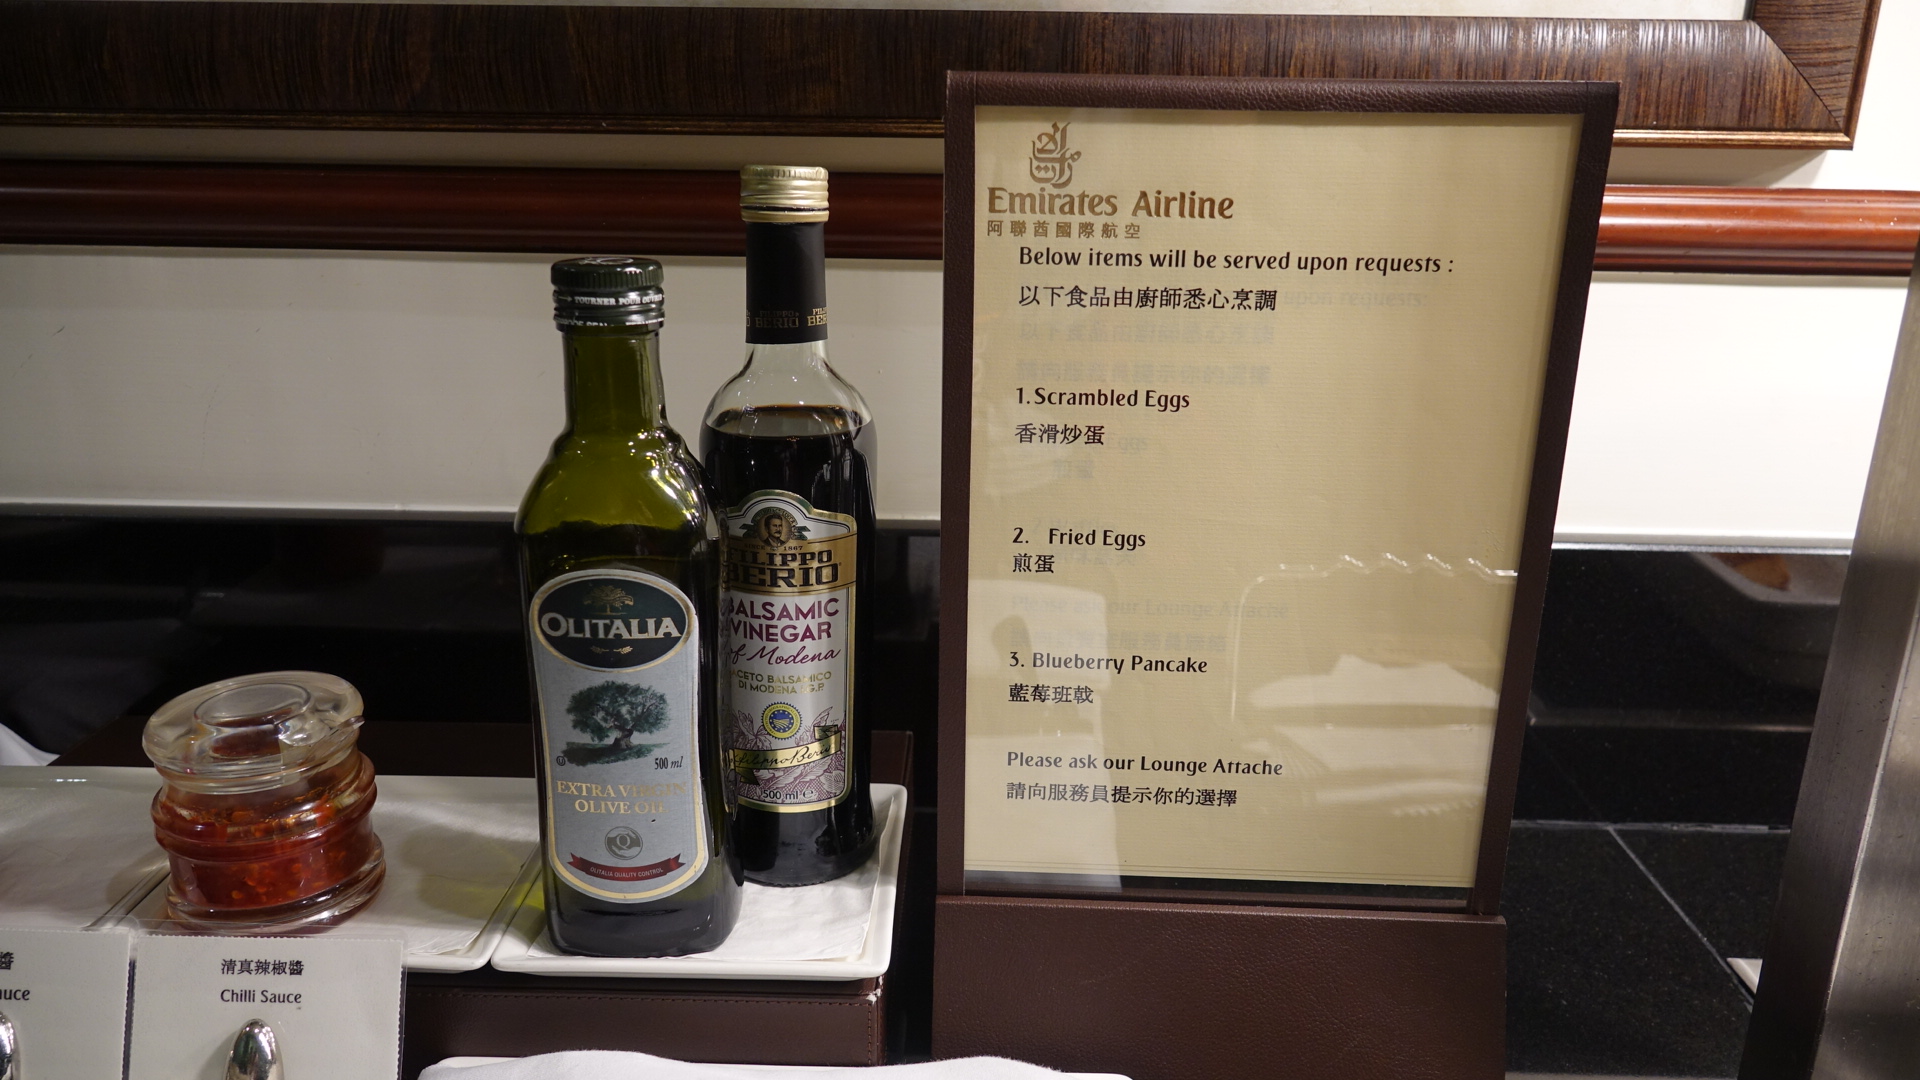 a bottle of oil and a menu